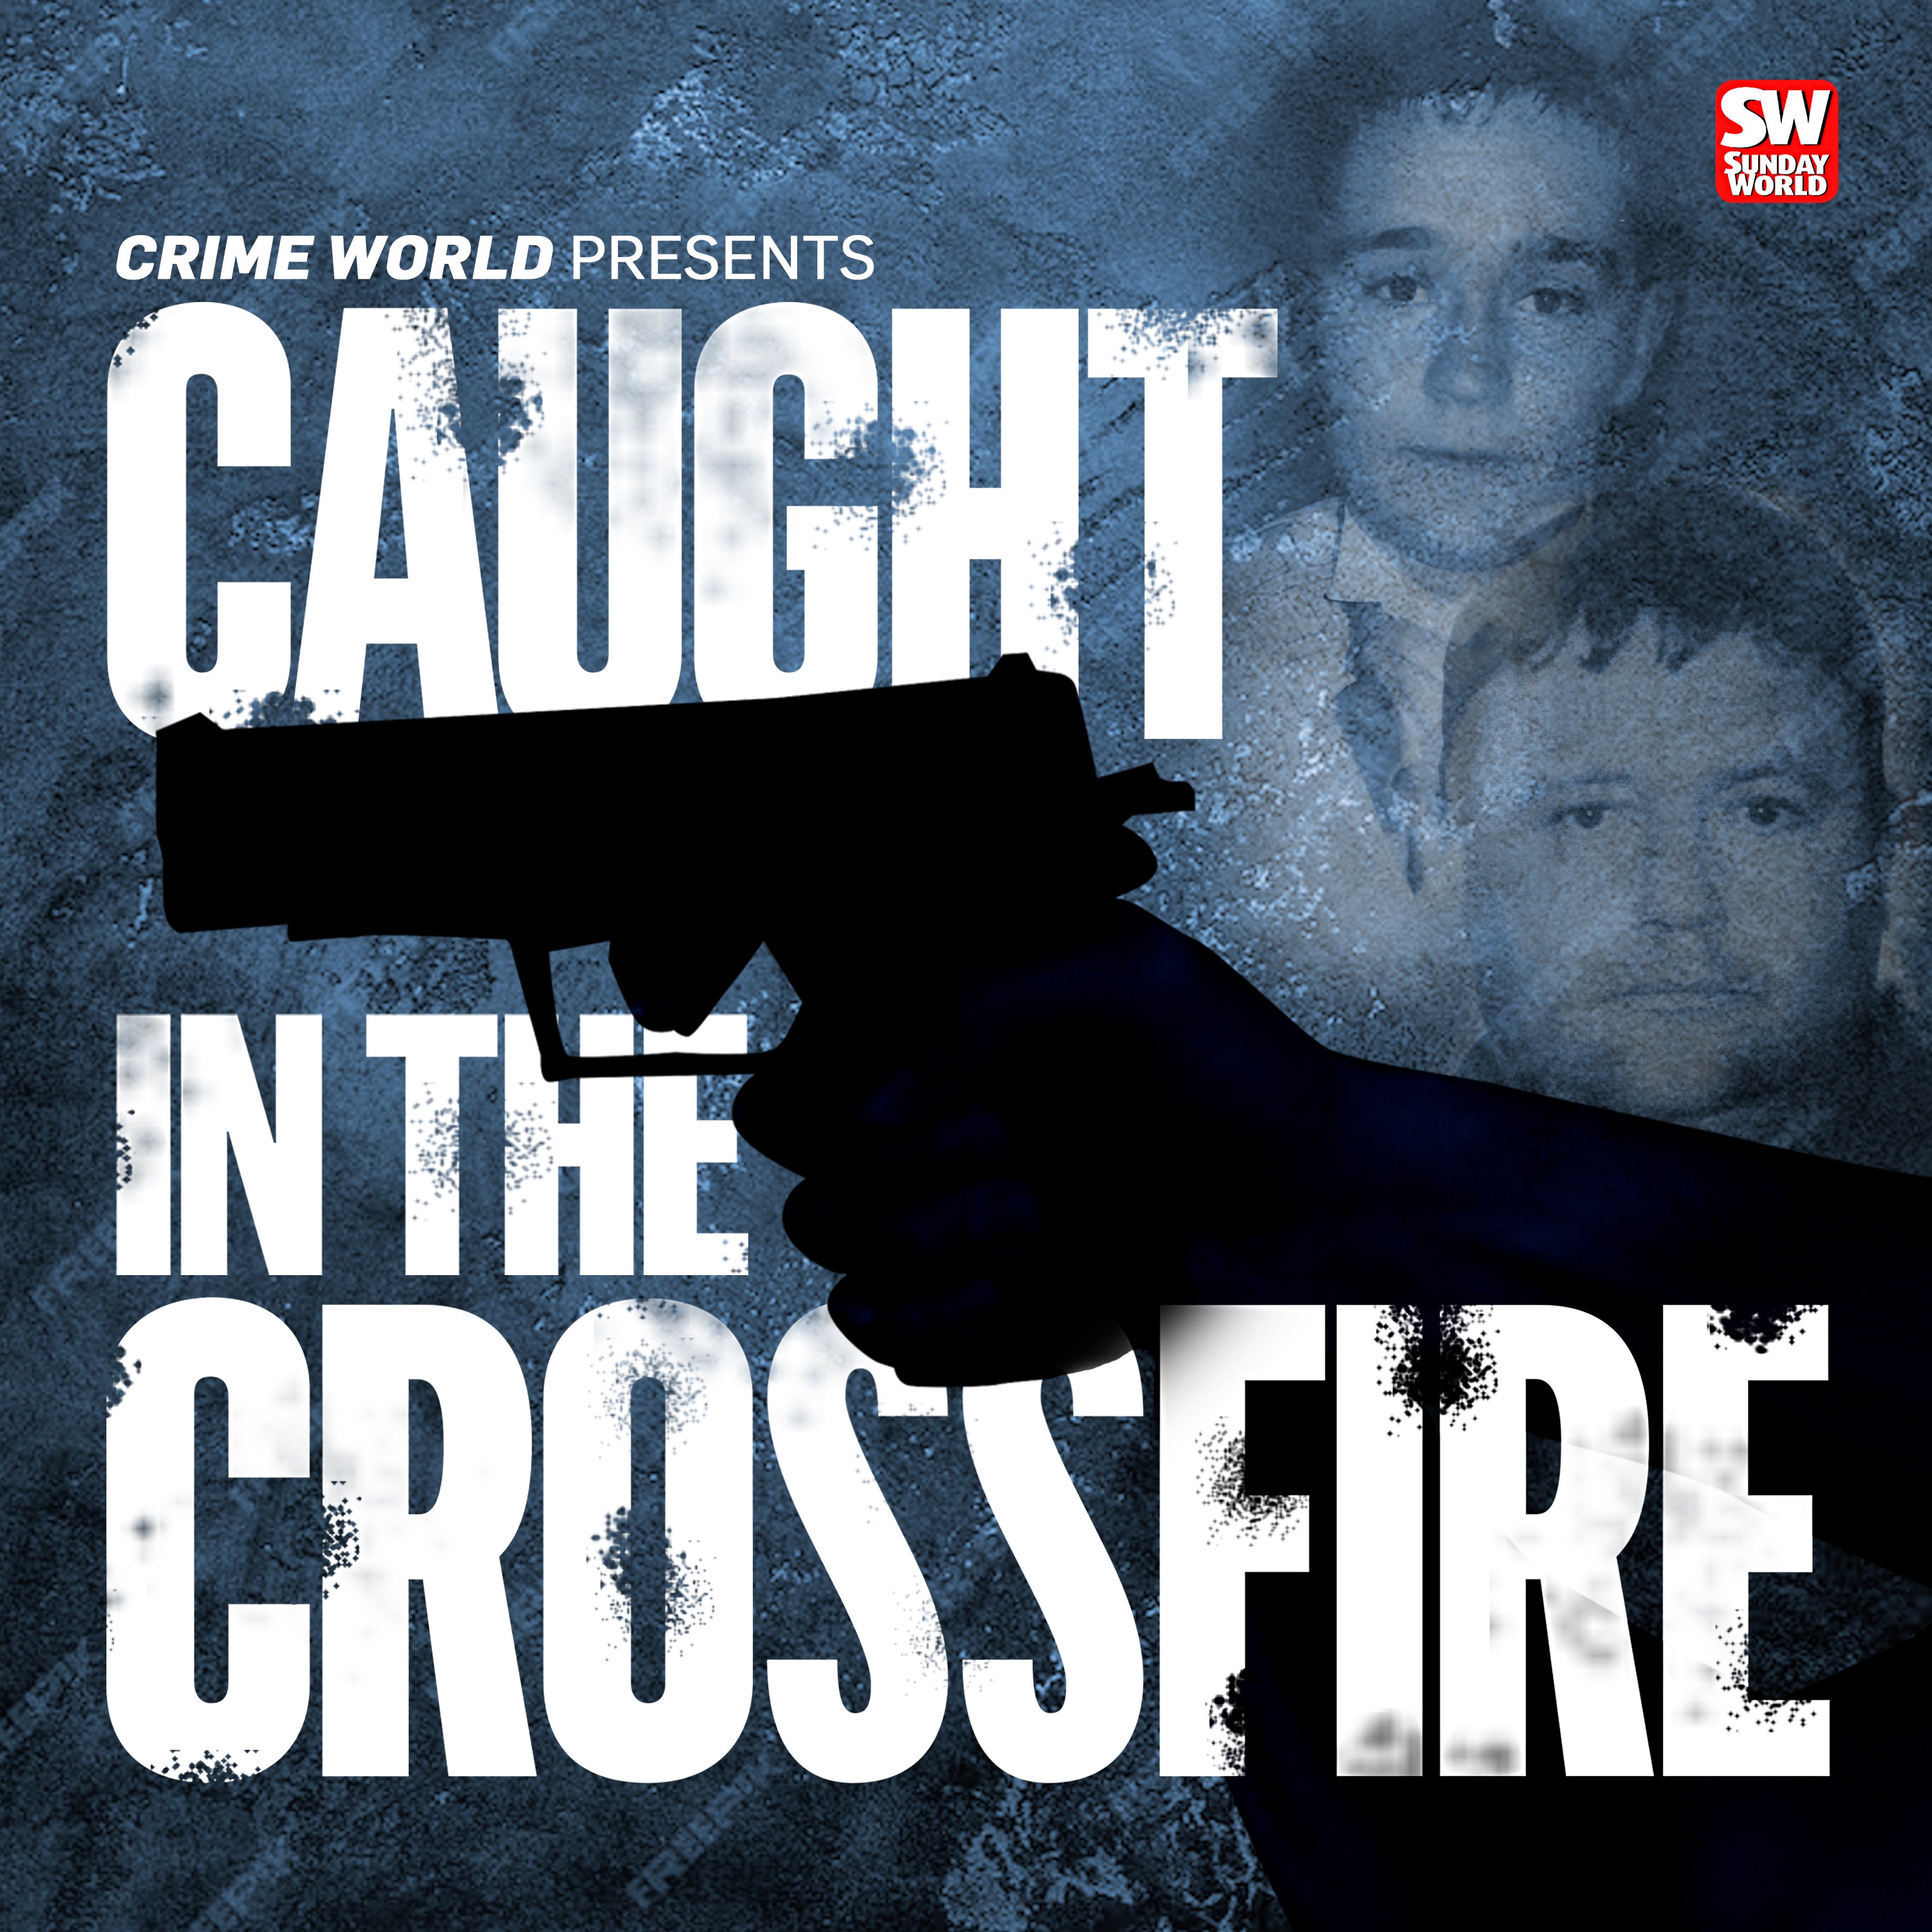 Introducing: Caught In The Crossfire